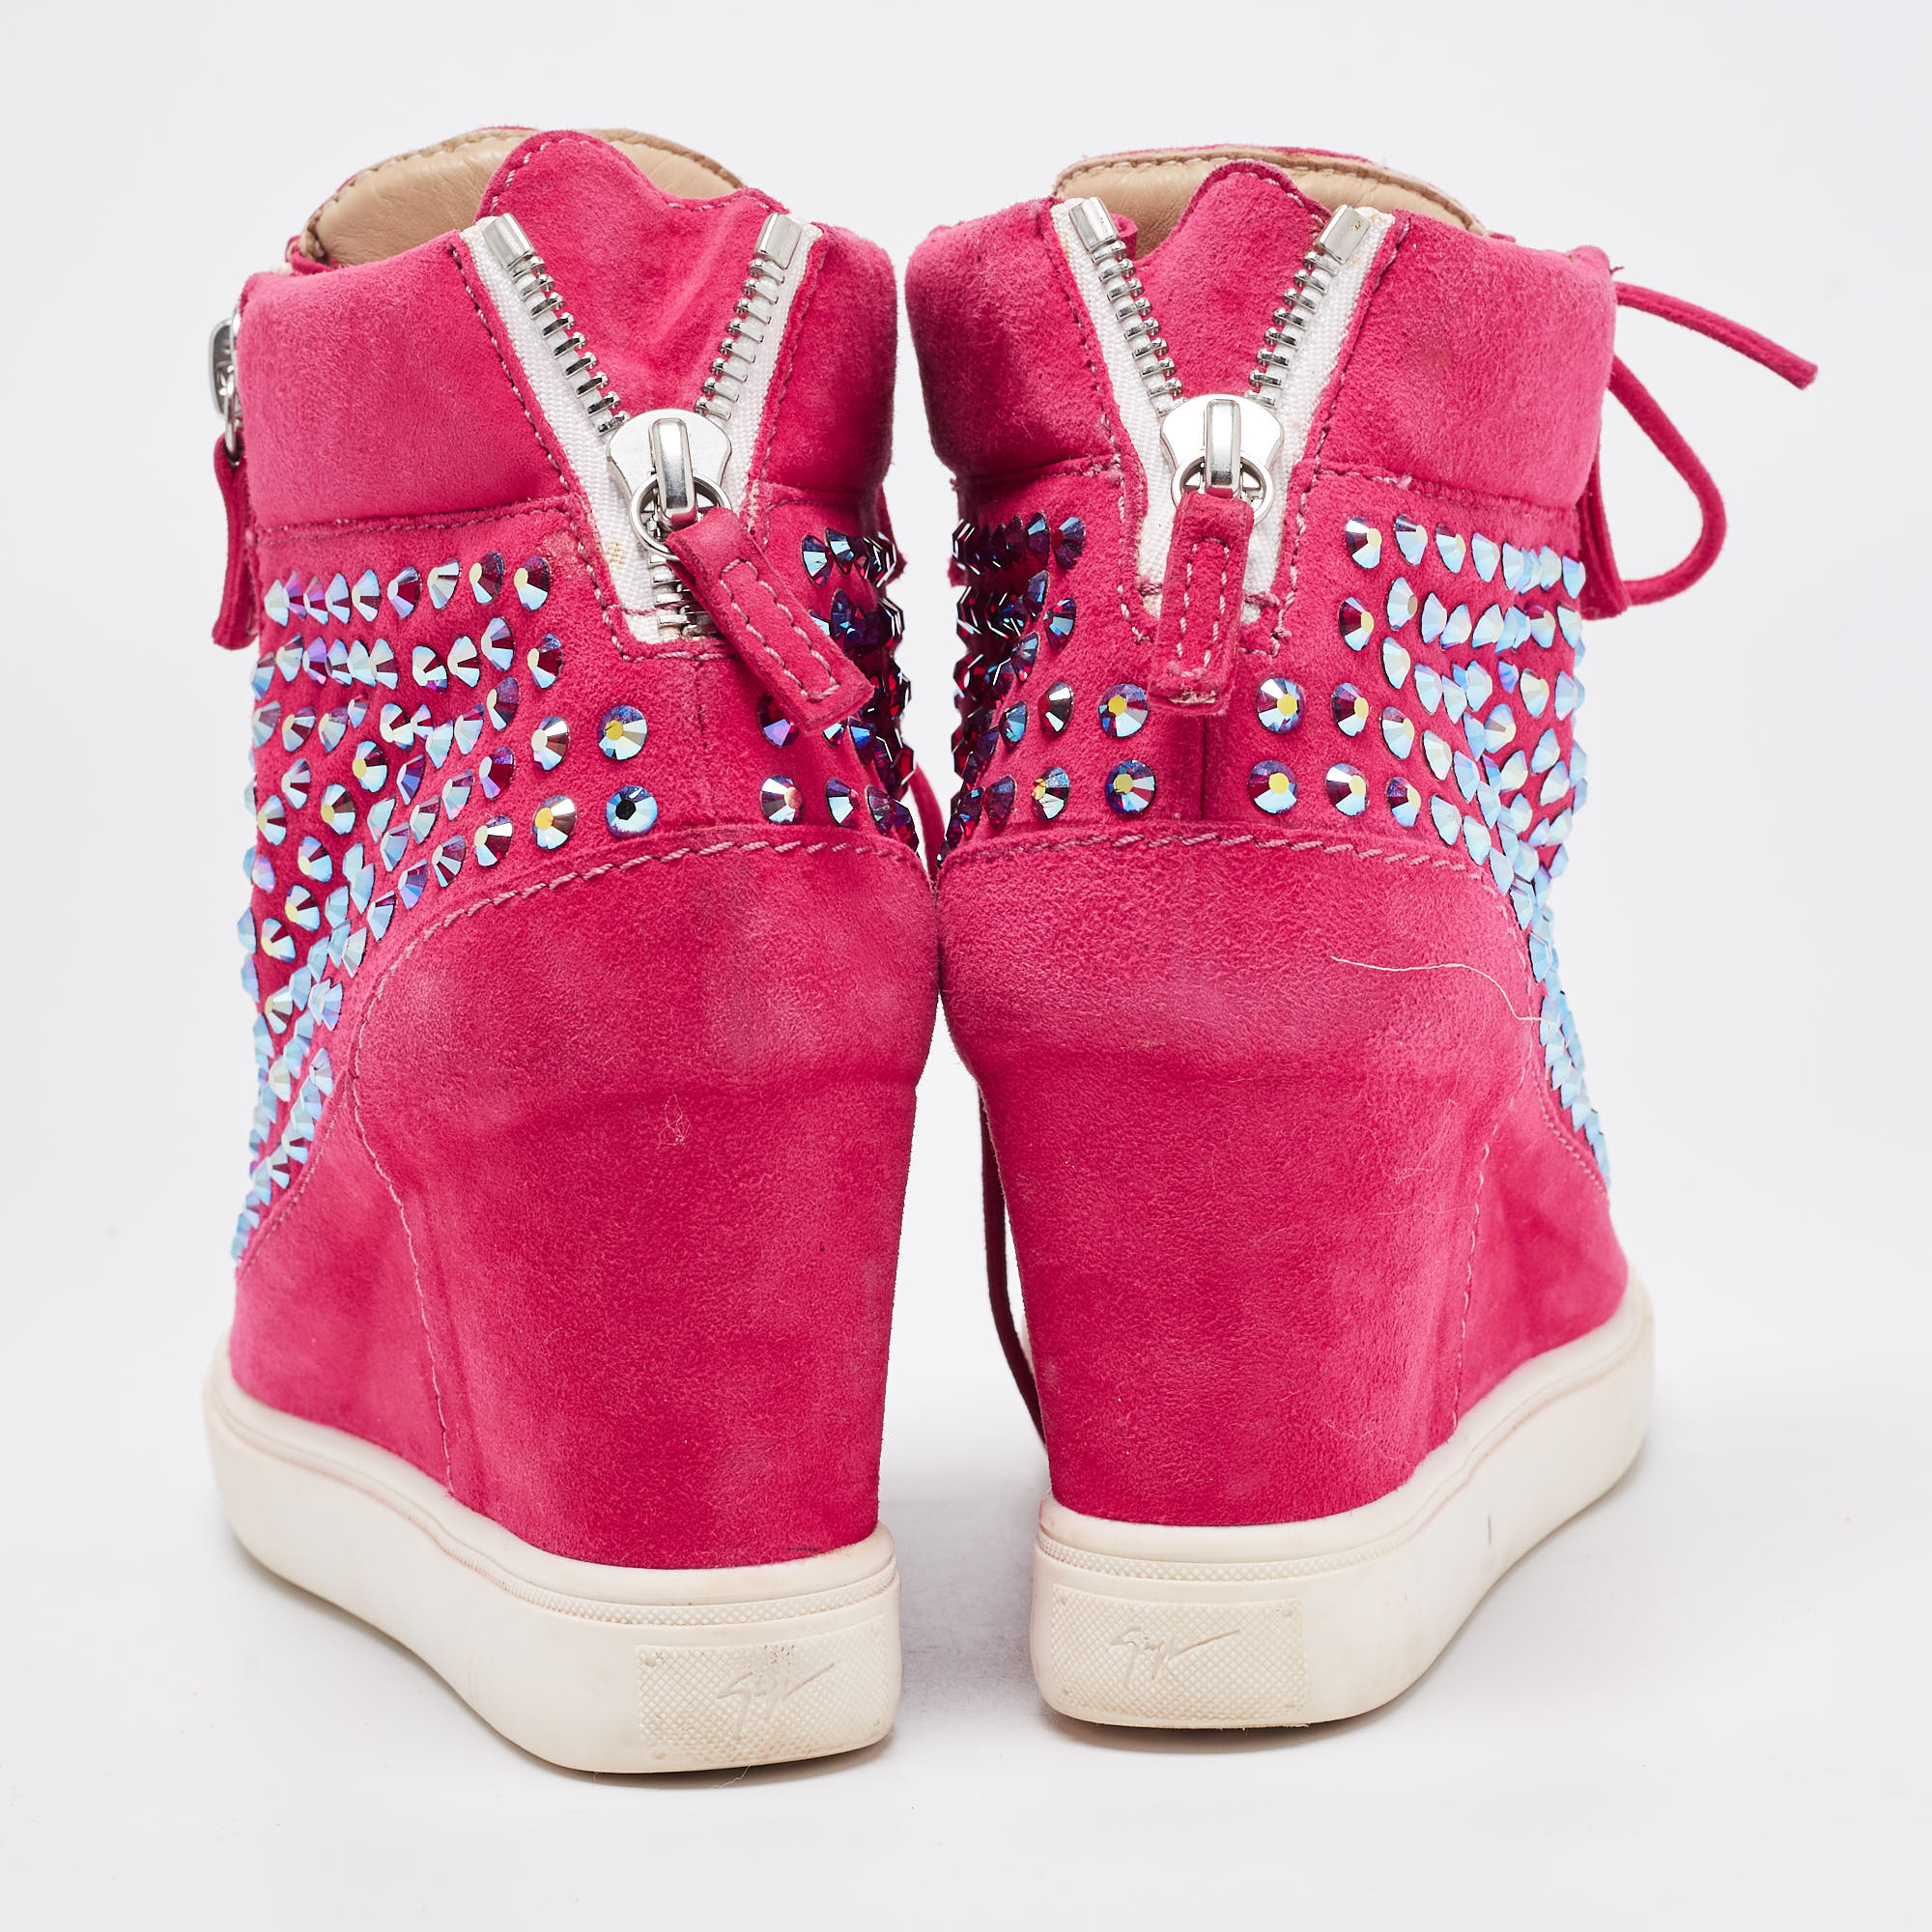 Giuseppe Zanotti Pink Suede Crystal Embellished Wedge Sneakers Size 39